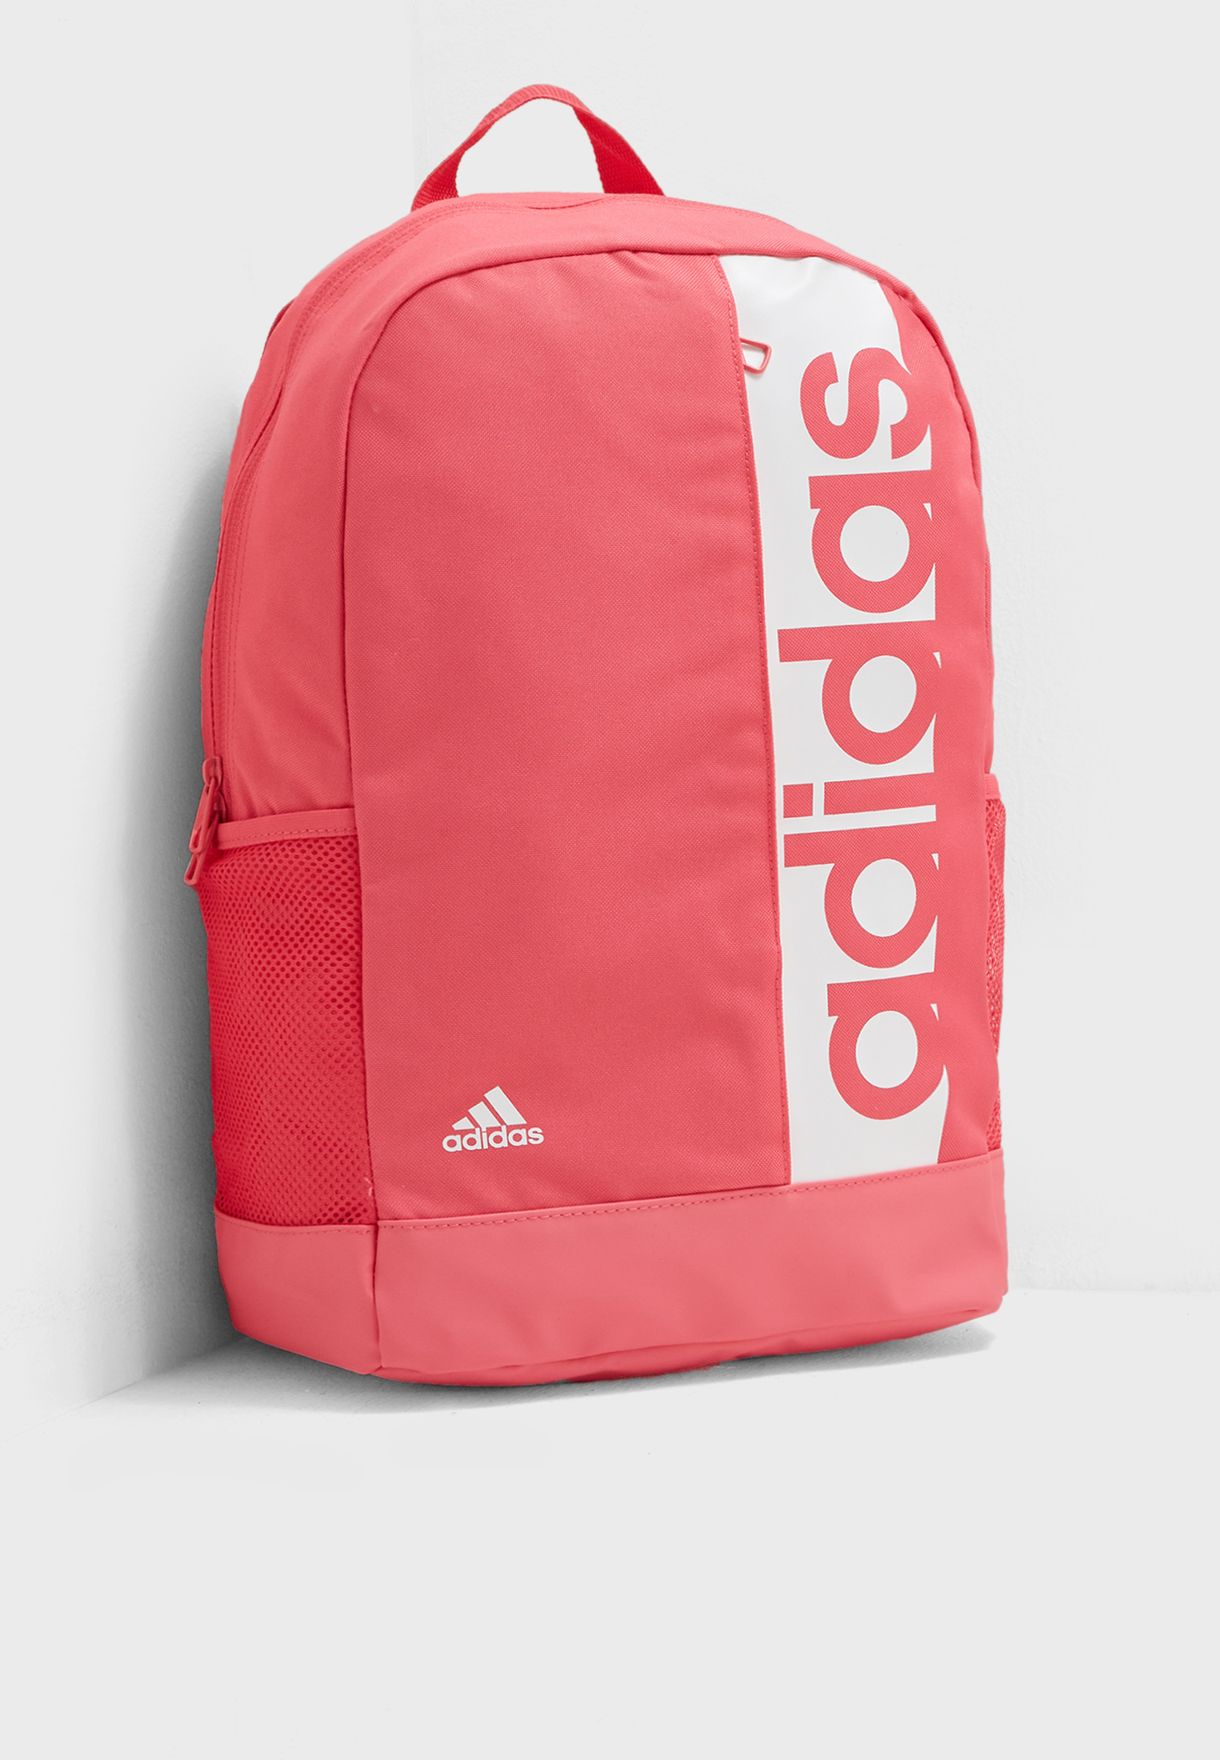 adidas linear backpack pink